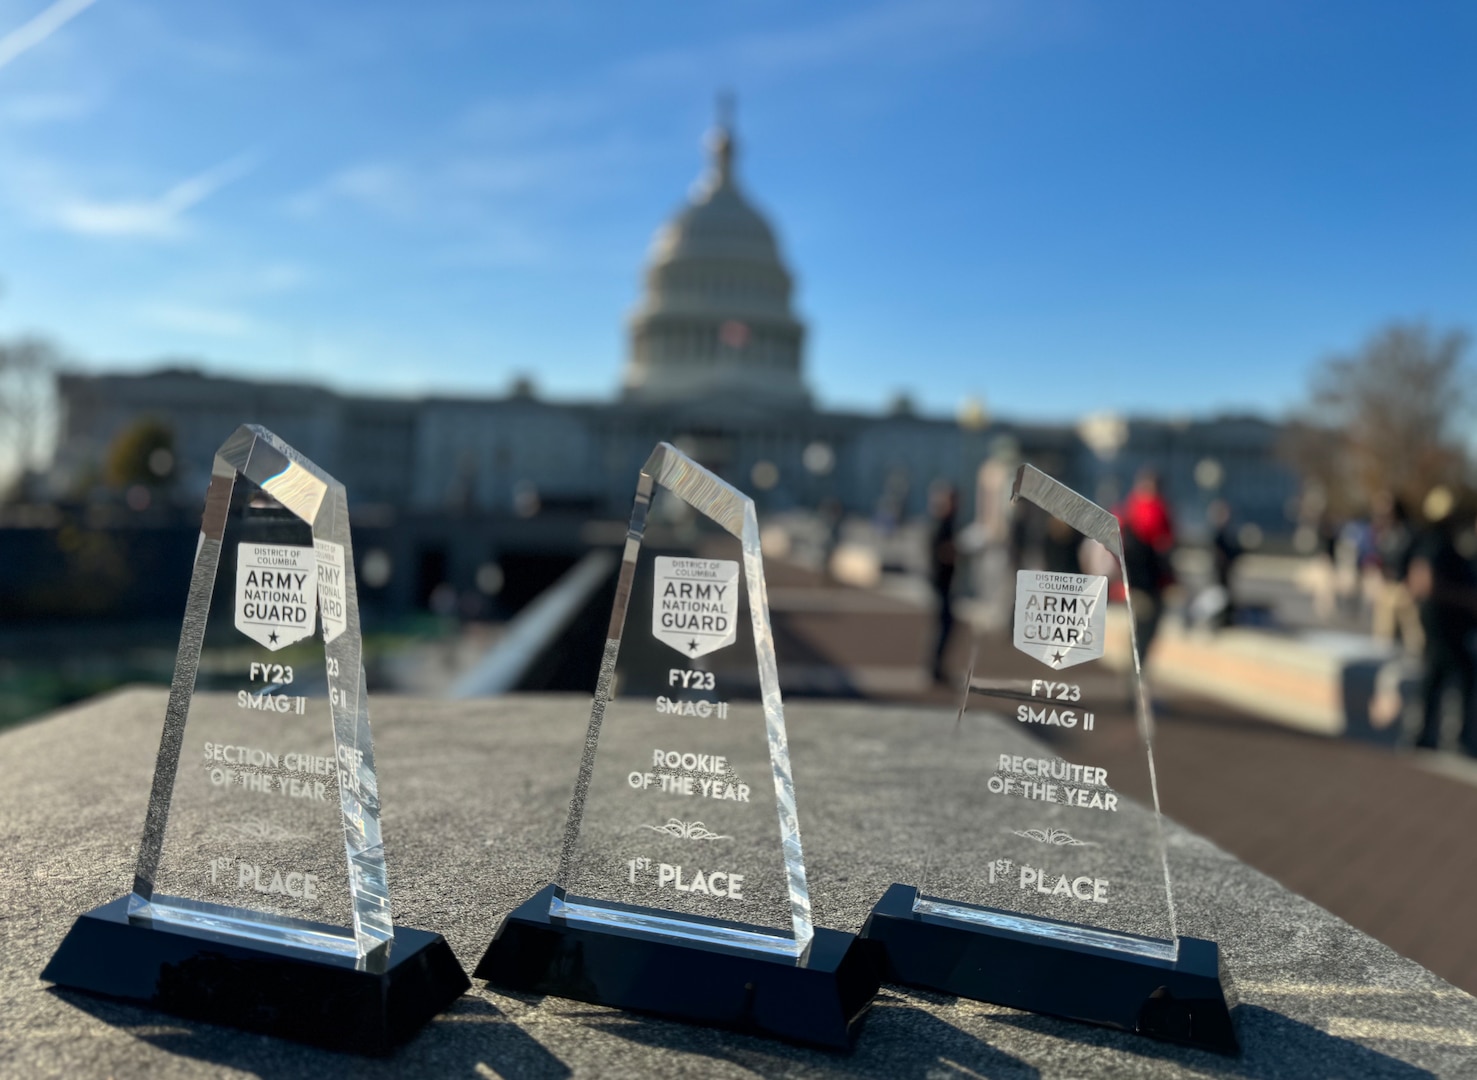 Three glass awards sit with the U.S. Capitol in the background